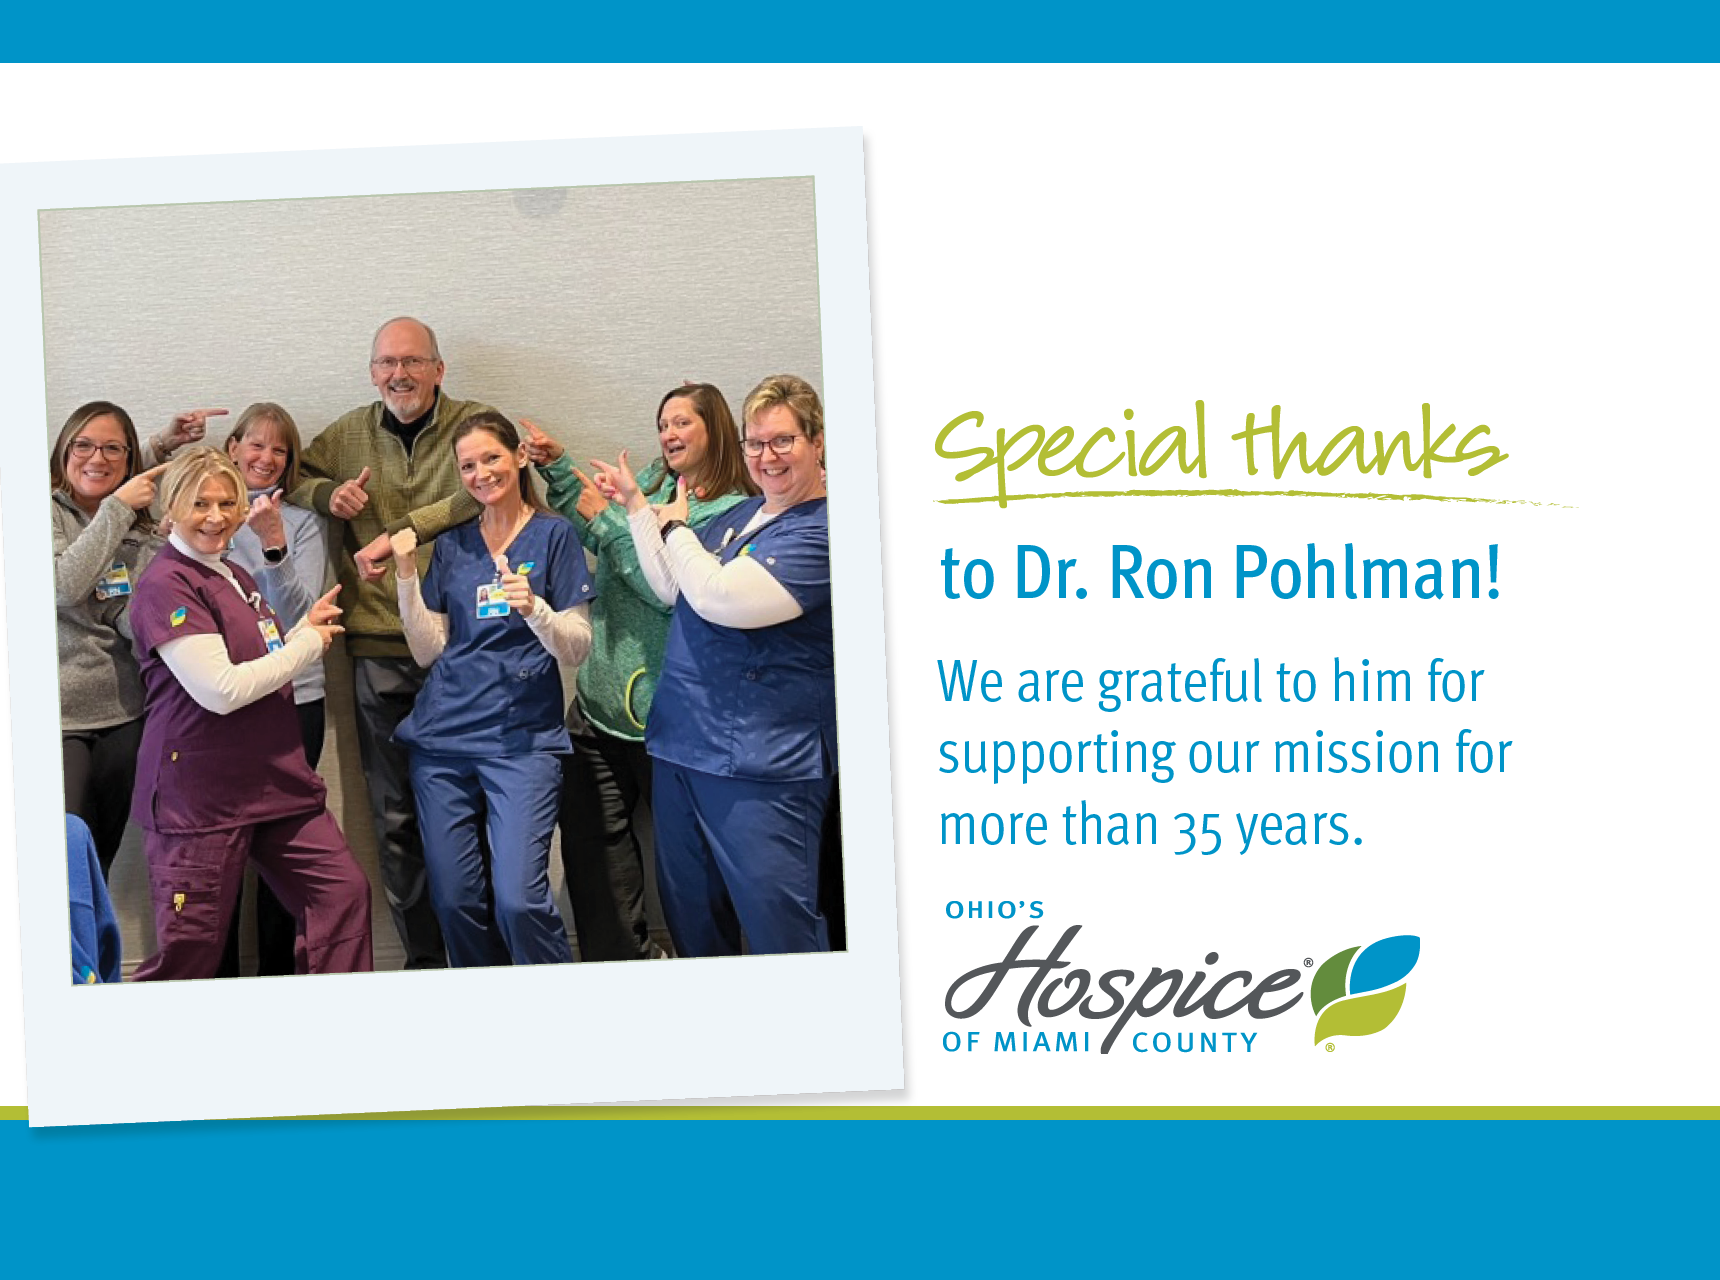 Special thanks to Dr. Ron Pohlman! We are grateful to him for supporting our mission for more than 35 years. Ohio's Hospice of Miami County